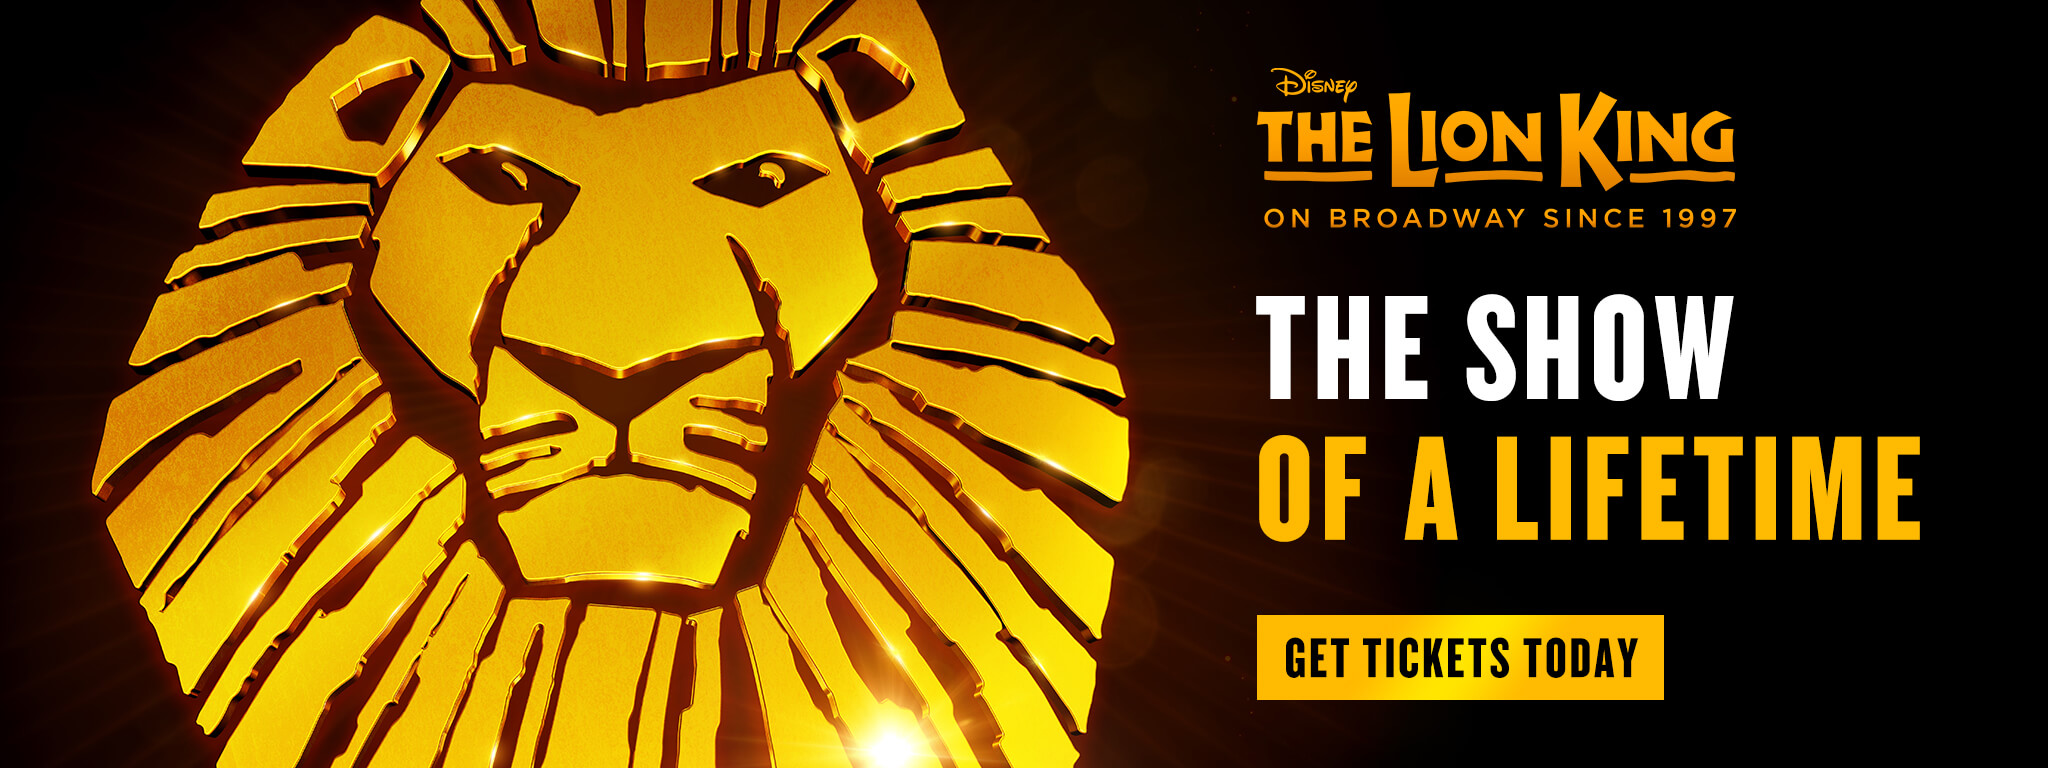 Disney THE LION KING - The Show of a Lifetime - GET TICKETS